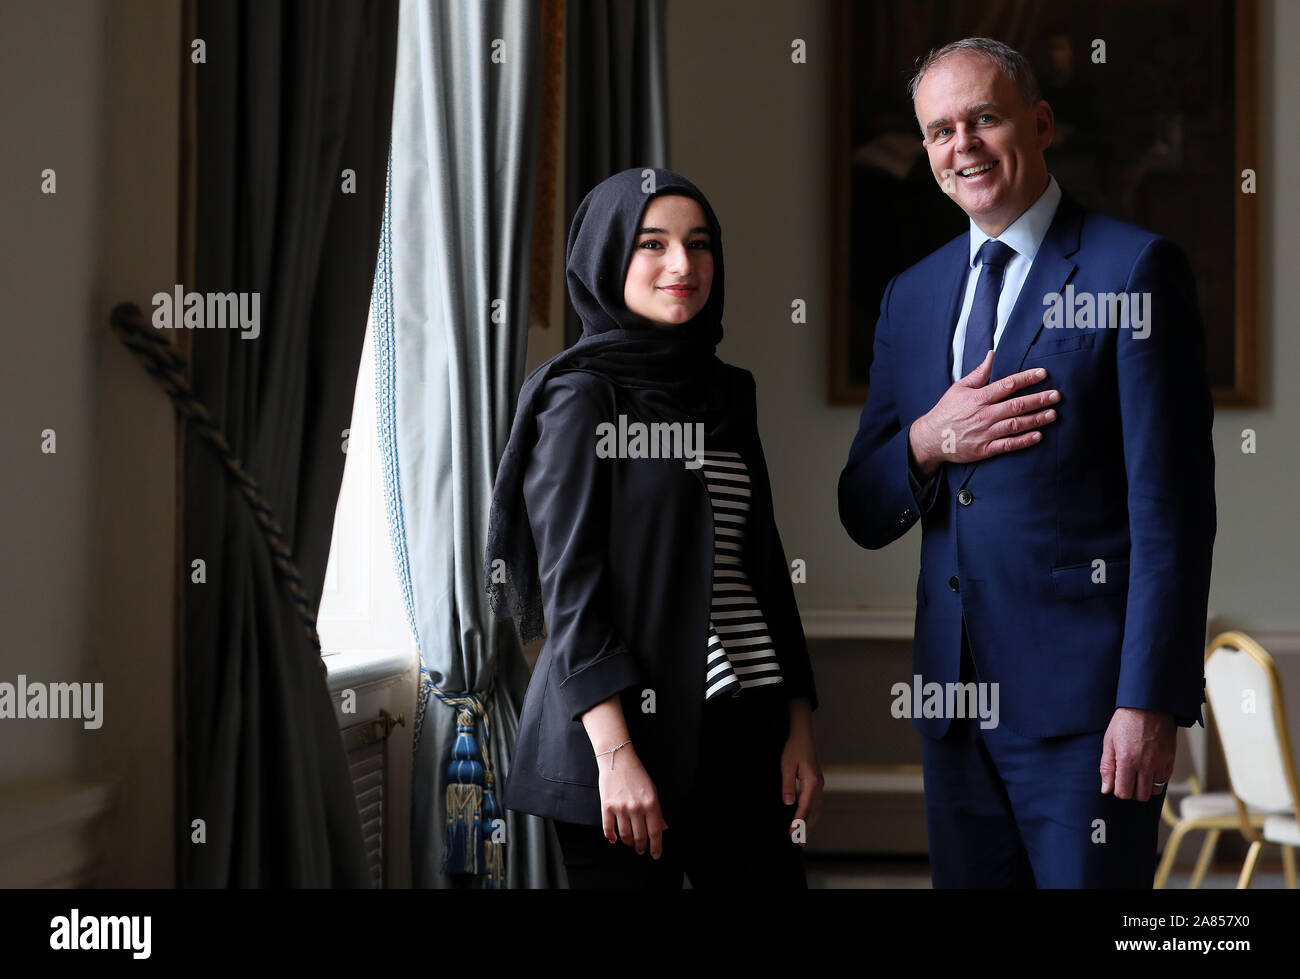 Minister for Education Joe McHugh with RCSI medical student Suaad Alshleh at the Royal College of Surgeons Ireland in Dublin. Suaad was presented with the inaugral Professor William C Campbell Bursary which recognises the work of the Donegal Nobel Prize winner. Stock Photo